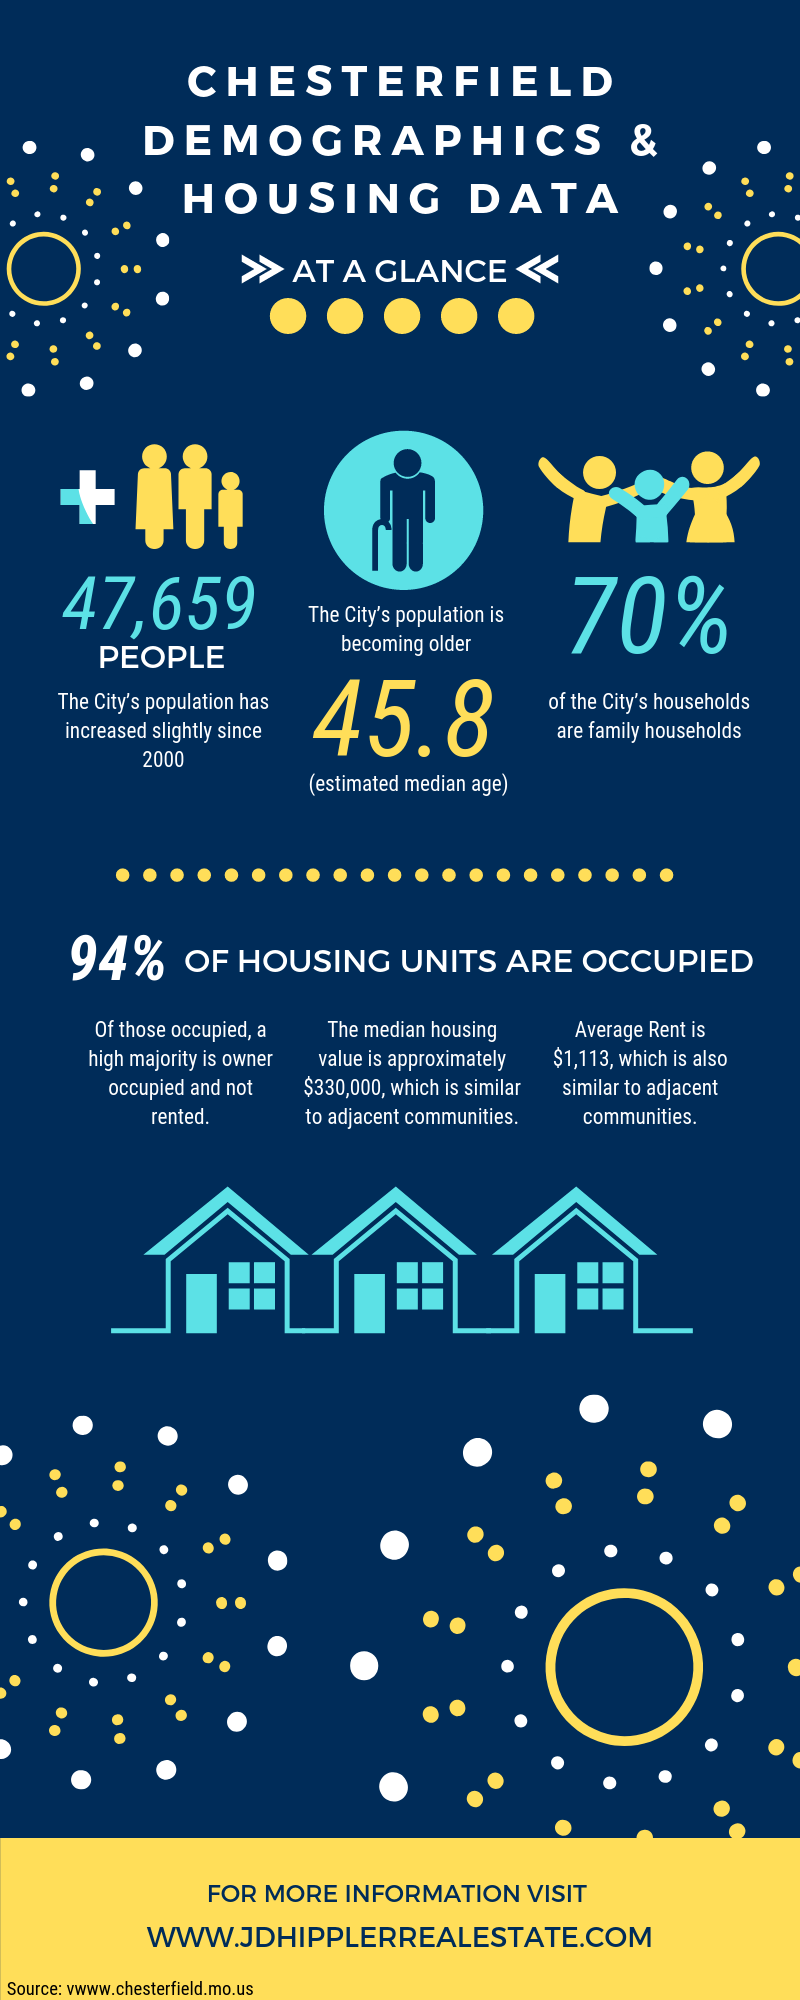 Chesterfield Demographics and Housing Data Infographic